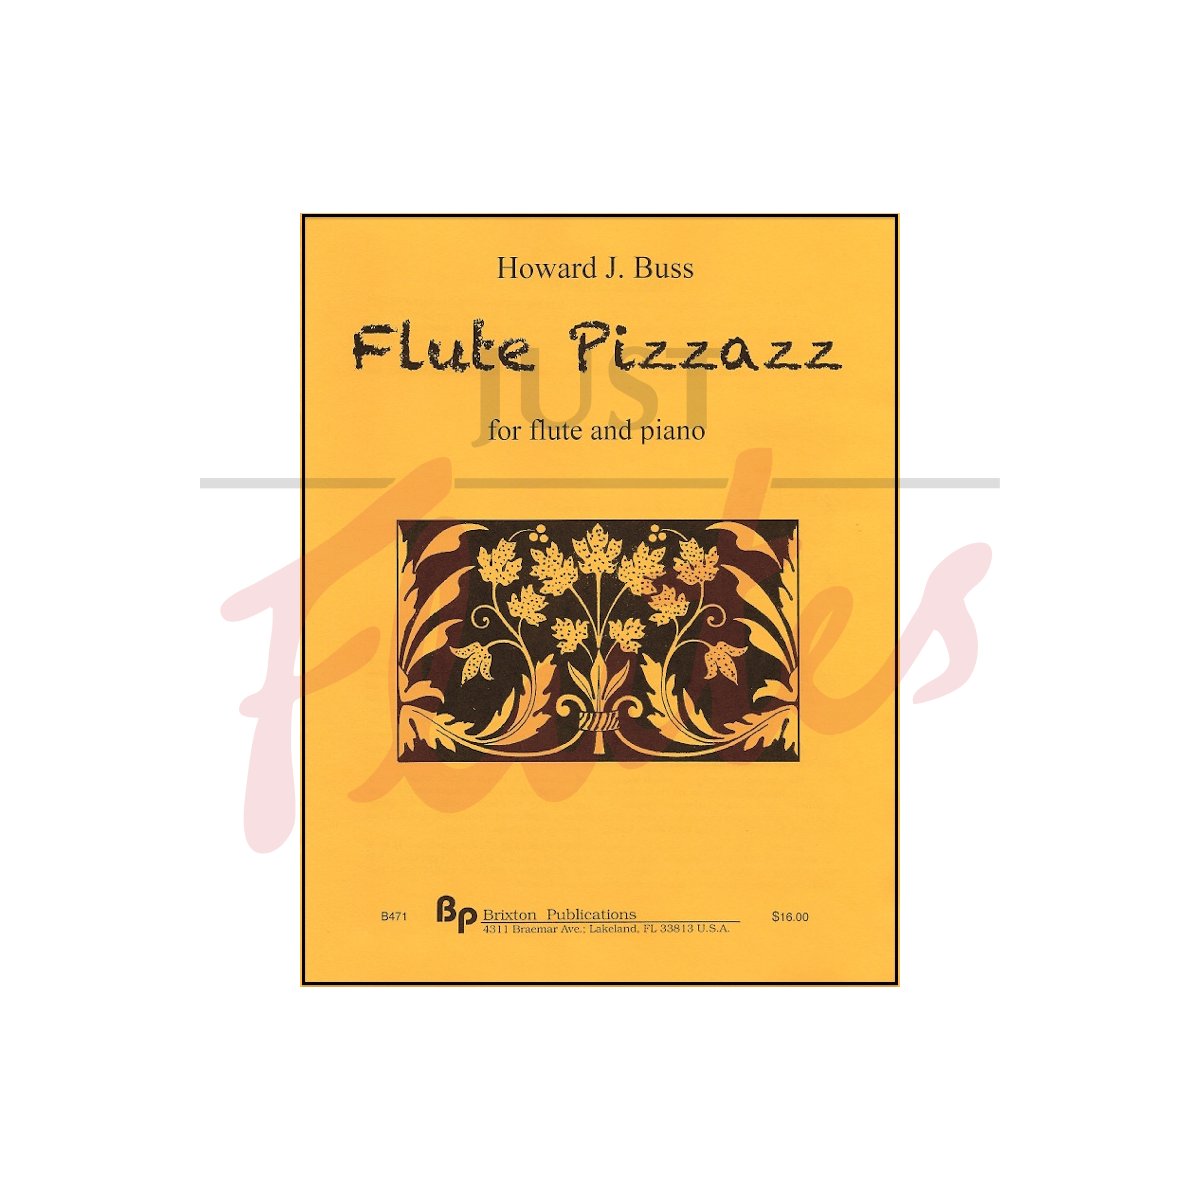 Flute Pizzazz for Flute and Piano